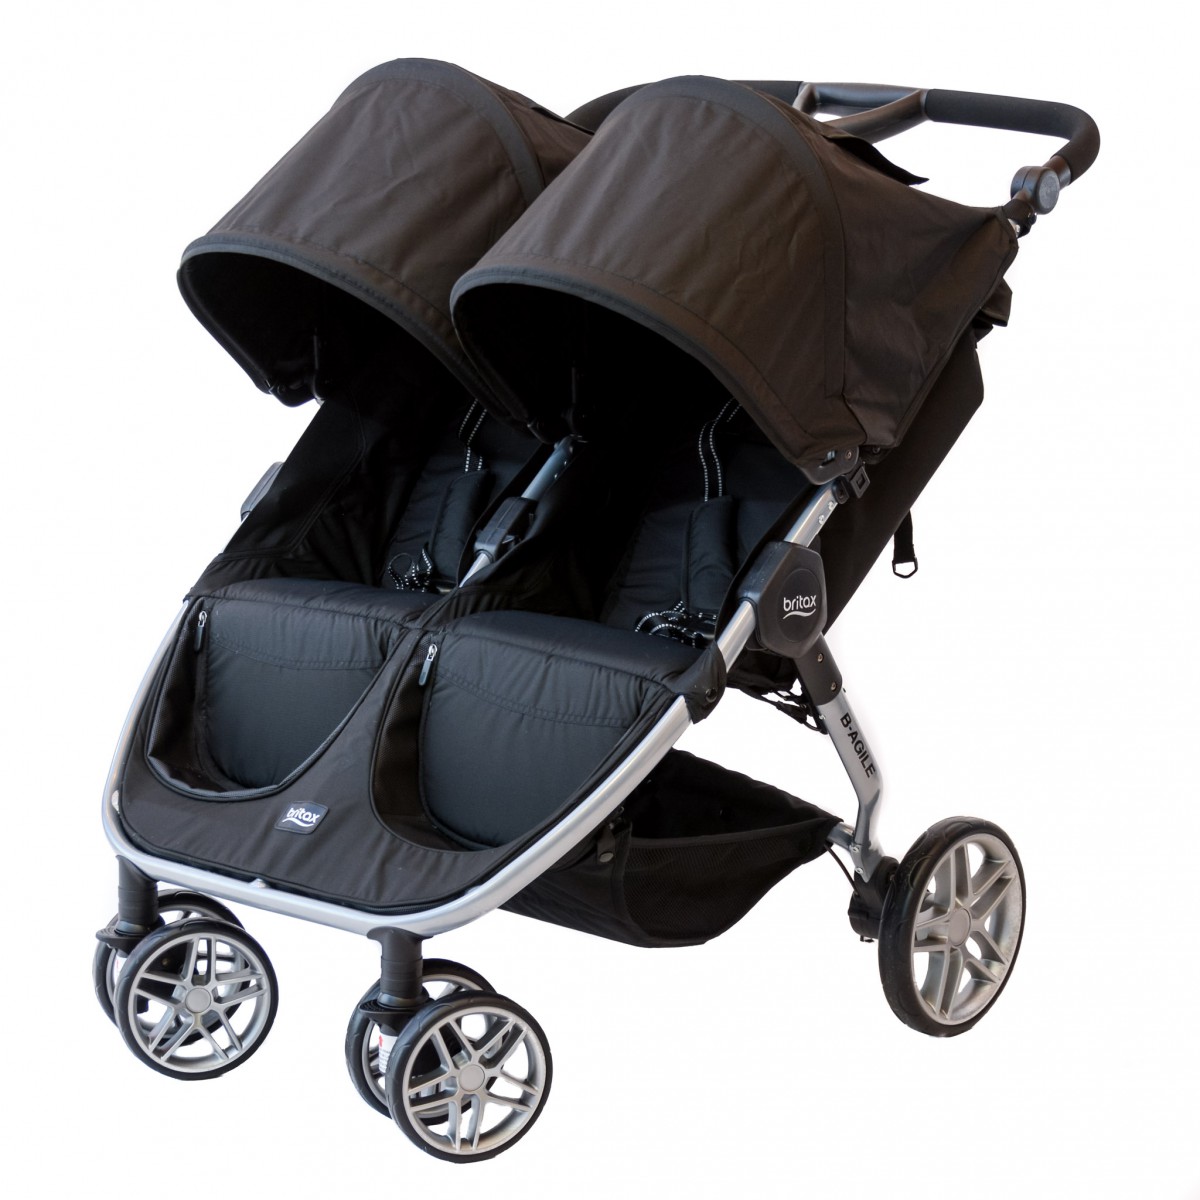 britax b-agile double double stroller review